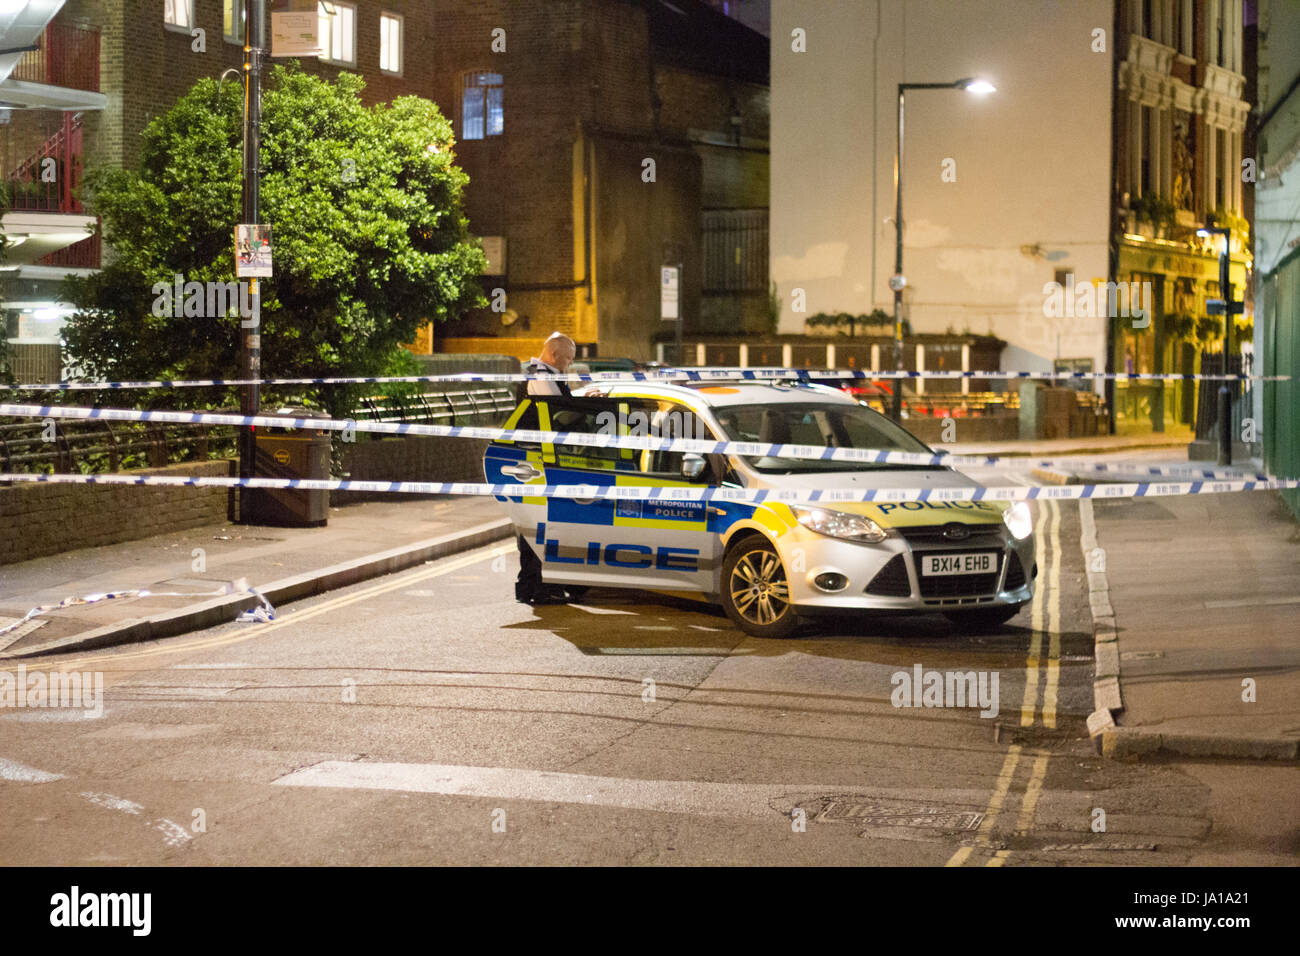 London, UK. 04th June, 2017. Police and armed response units respond to terrorist incident on London Bridge Saturday night. Six people have been killed in attacks in London.  Pictures taken shortly after midnight Saturday night, Sunday morning. Credit: Brayan Lopez/Alamy Live News Stock Photo